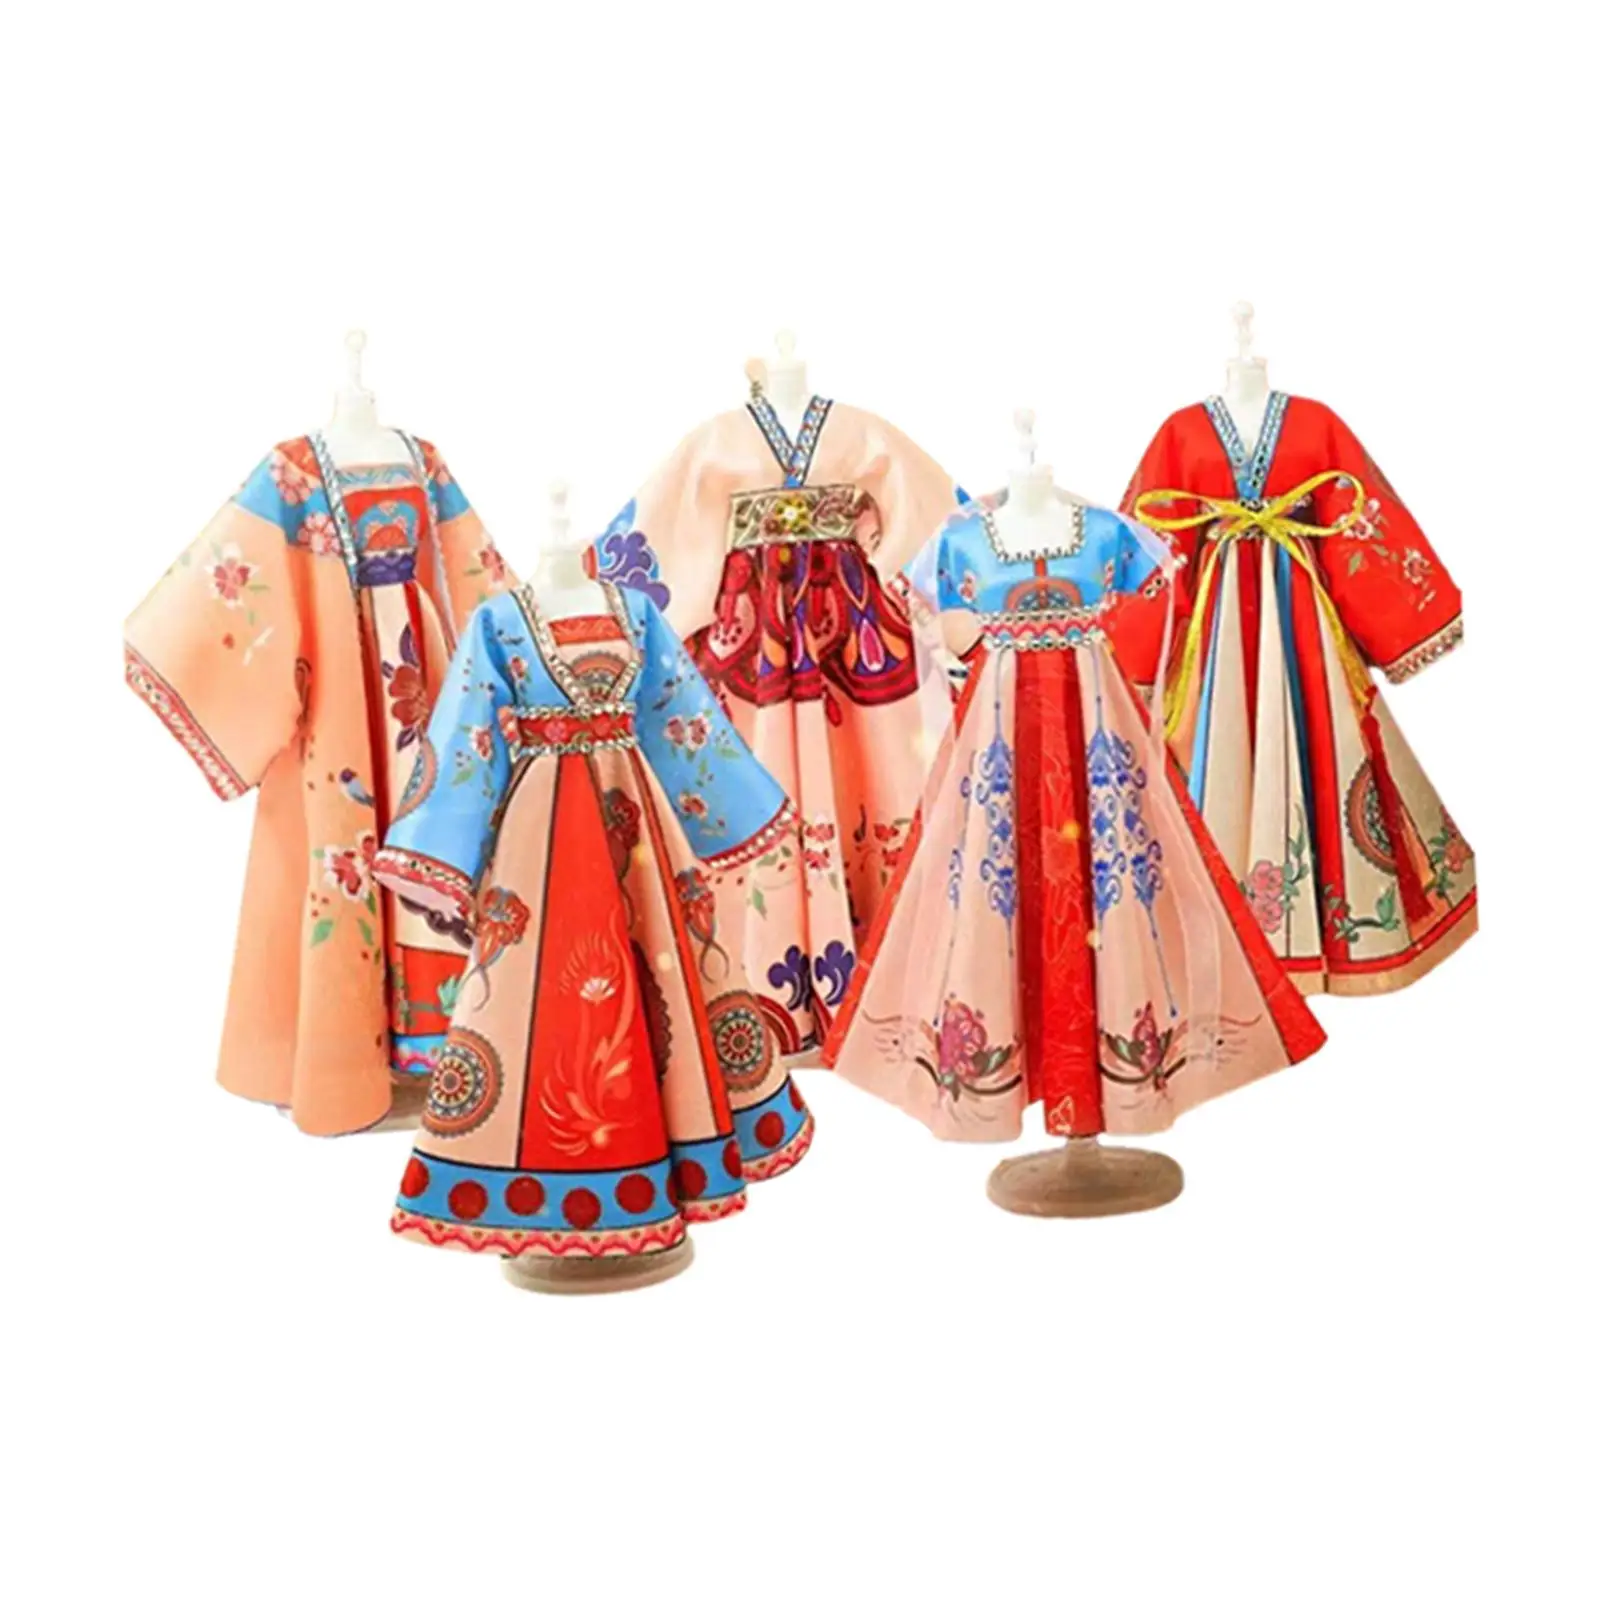 Fashion Design Kits Learning Toys Valentines Day Gifts for Kids Birthday Gifts Doll Clothing Design for Age 6 7 8 9 10 11 12